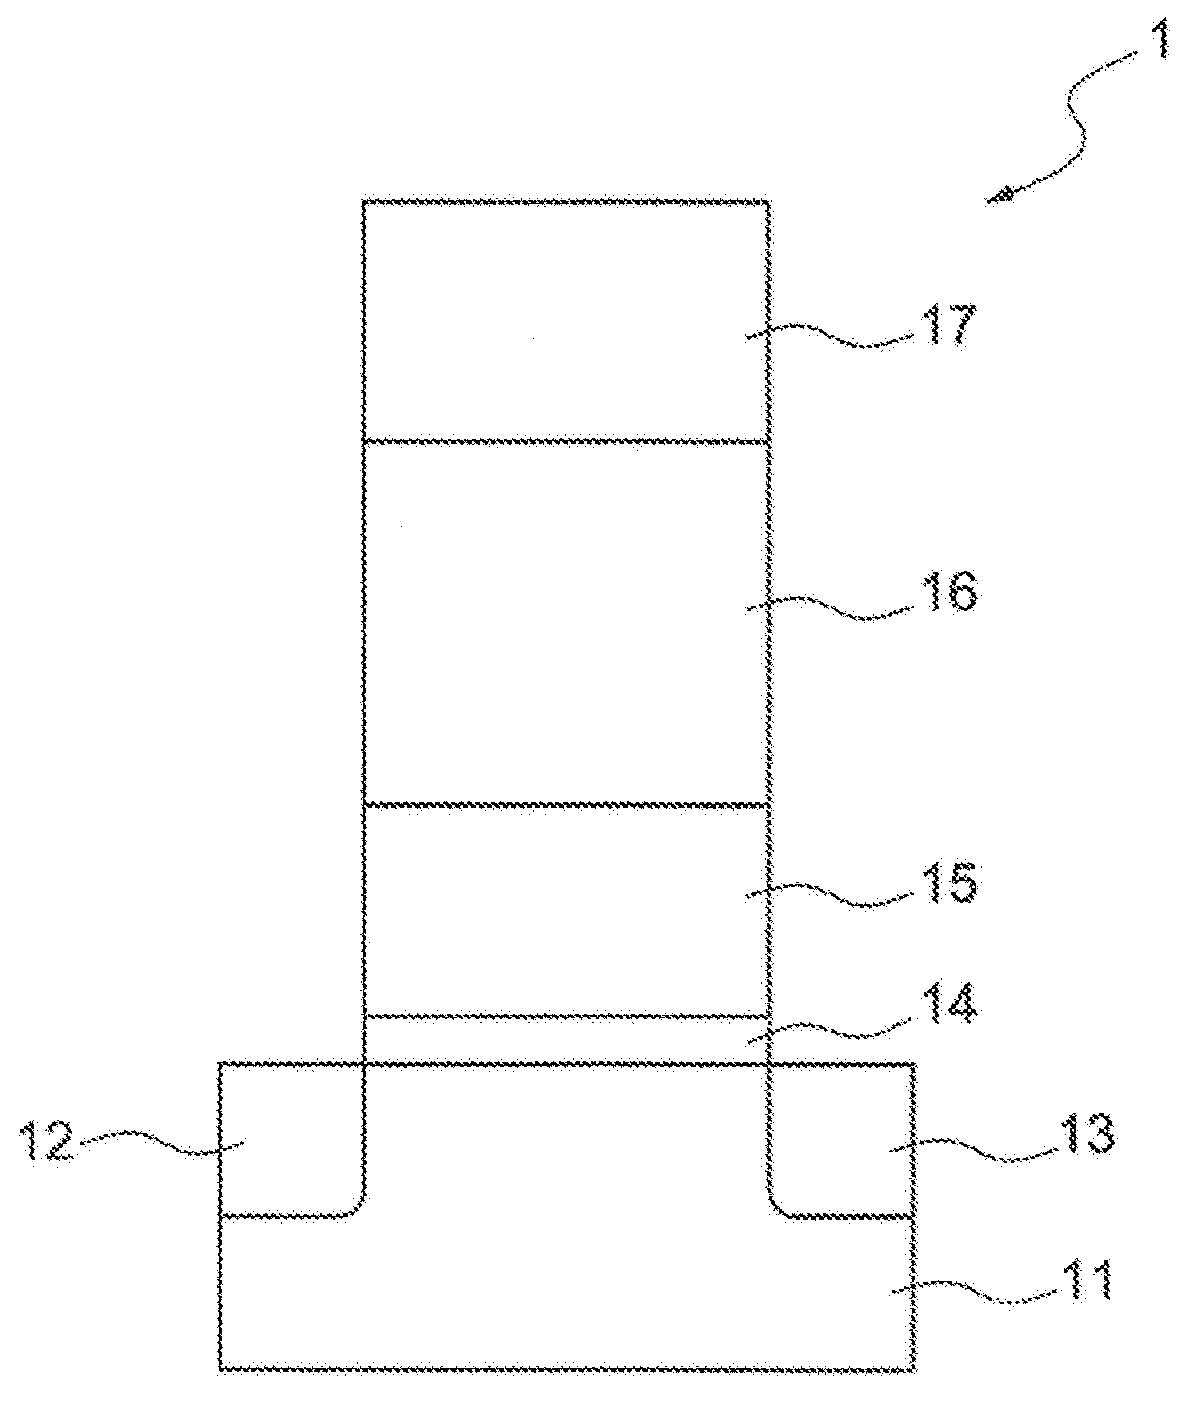 Flash memory structure and method of manufacturing the same